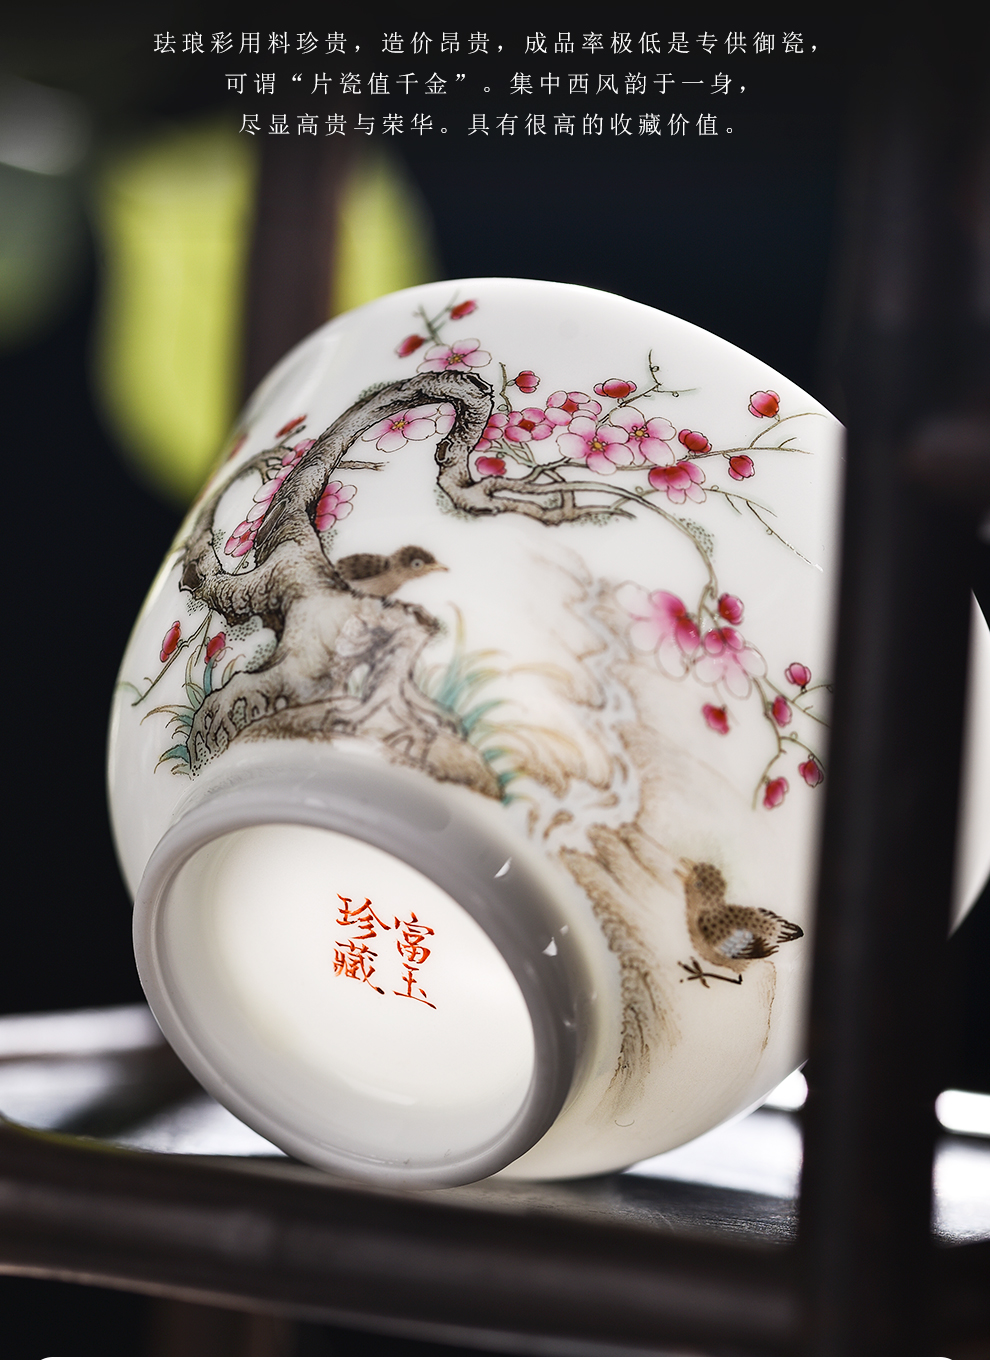 Jingdezhen flagship store of Chinese style hand colored enamel hong mei harbinger can collect tureen tea cups set gift box